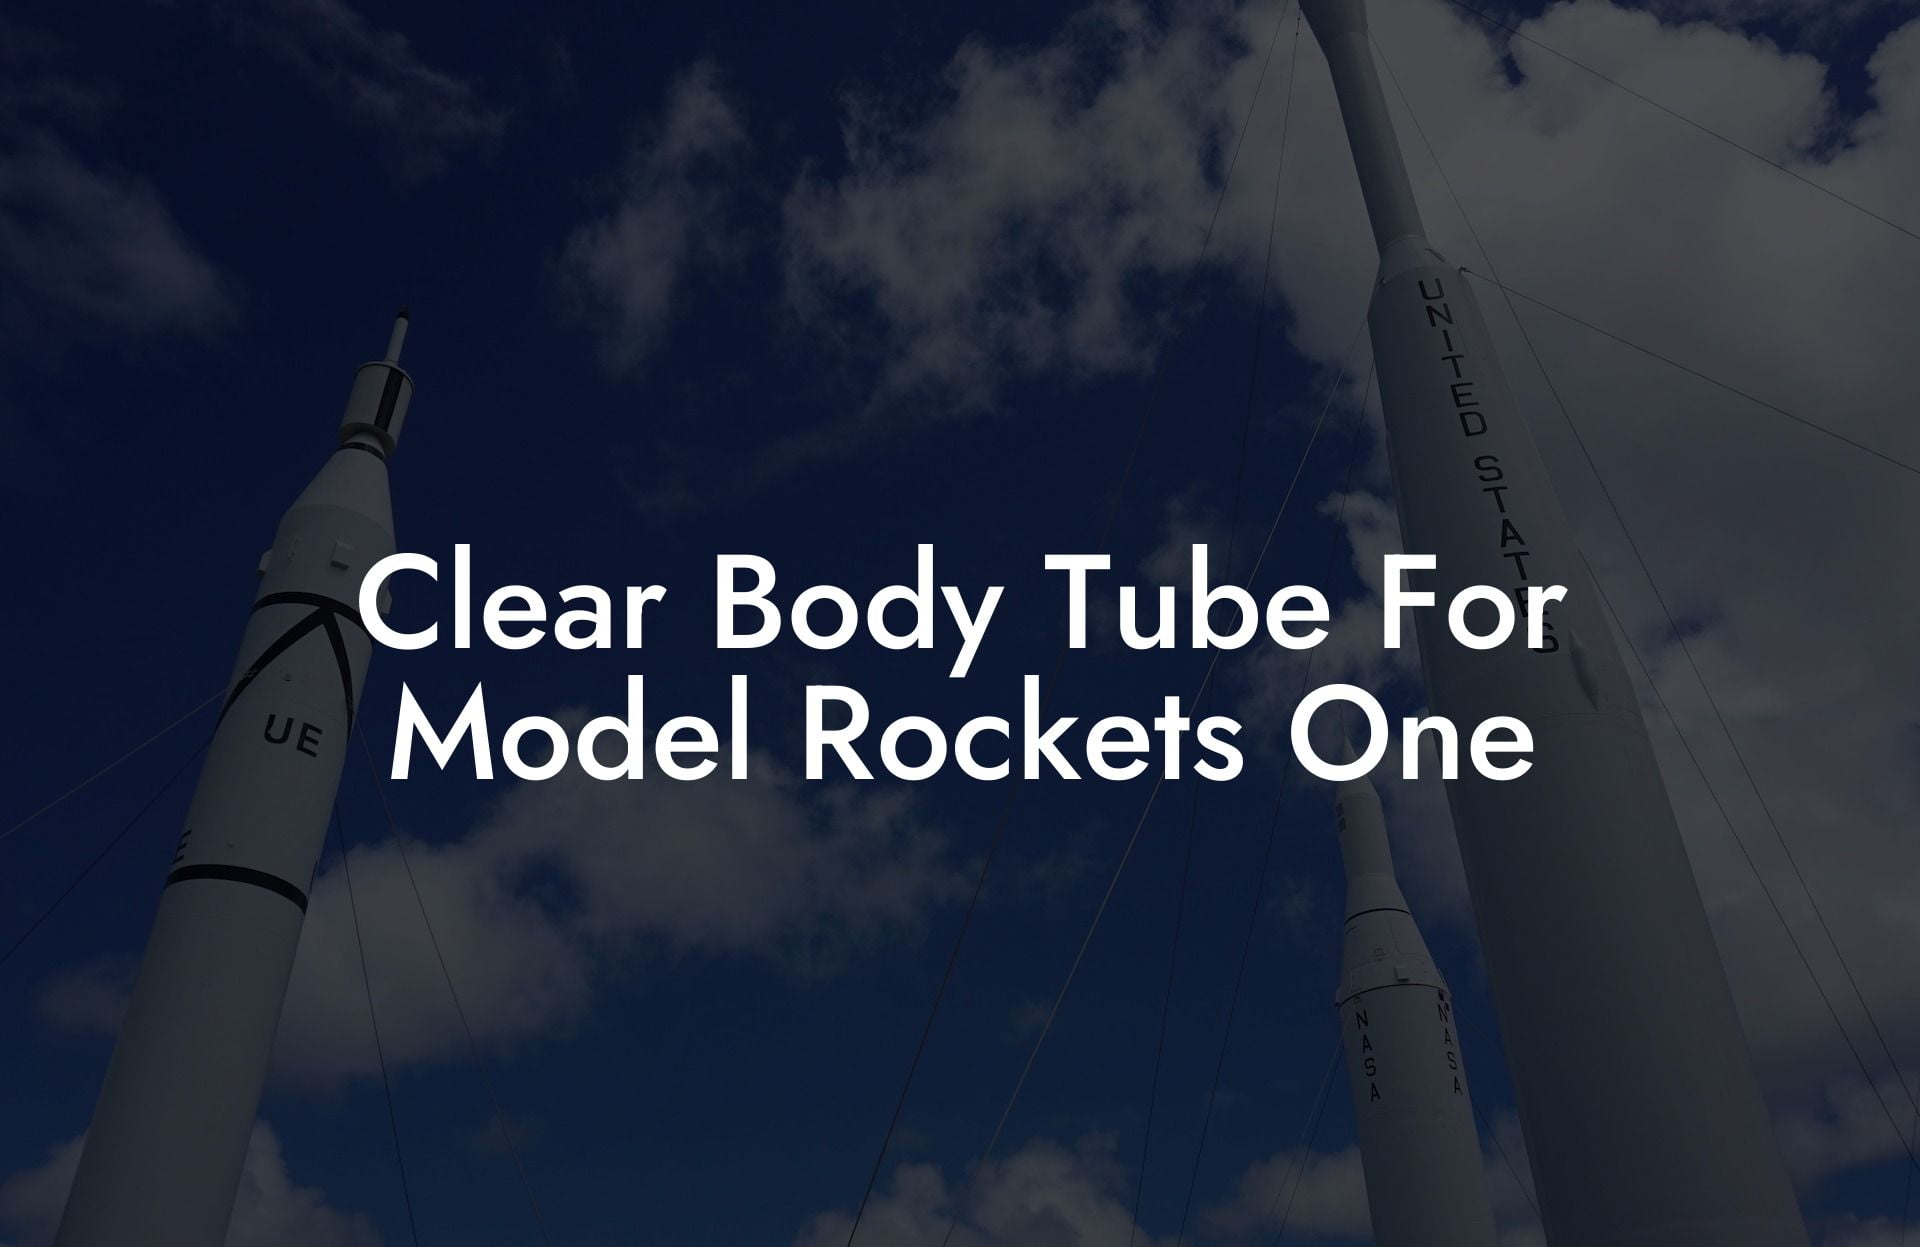 Clear Body Tube For Model Rockets One